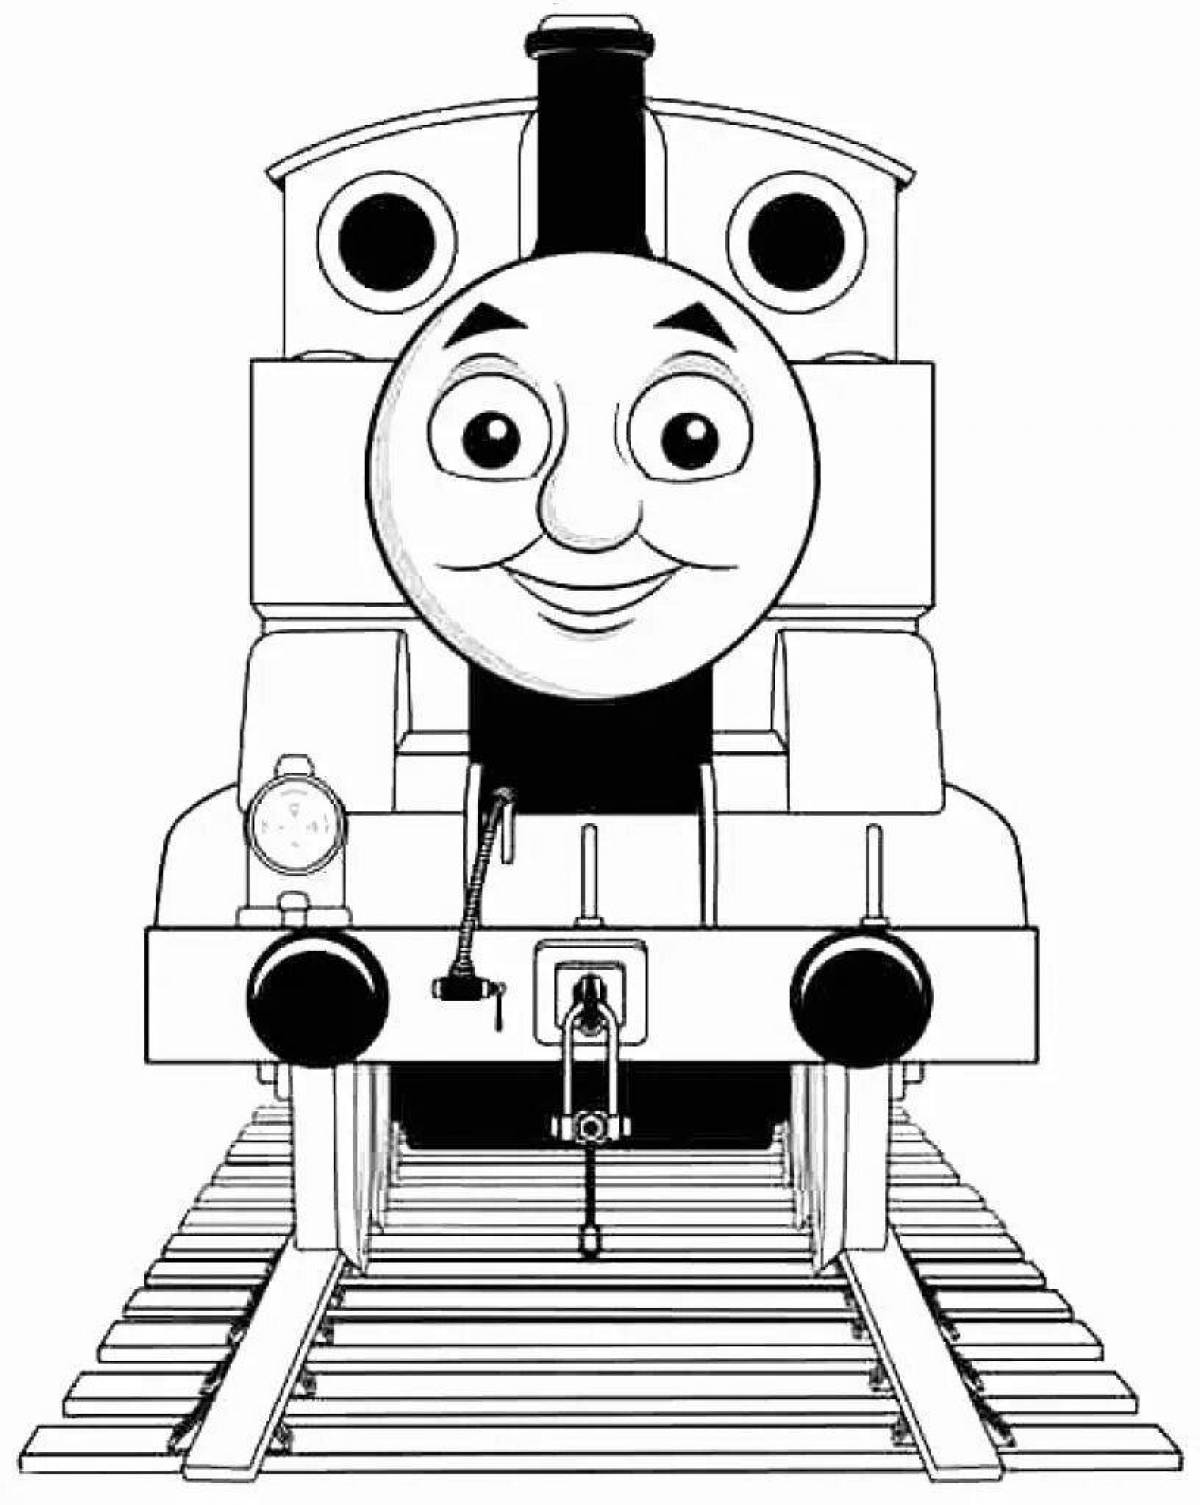 Thomas the Tank Engine funny coloring book